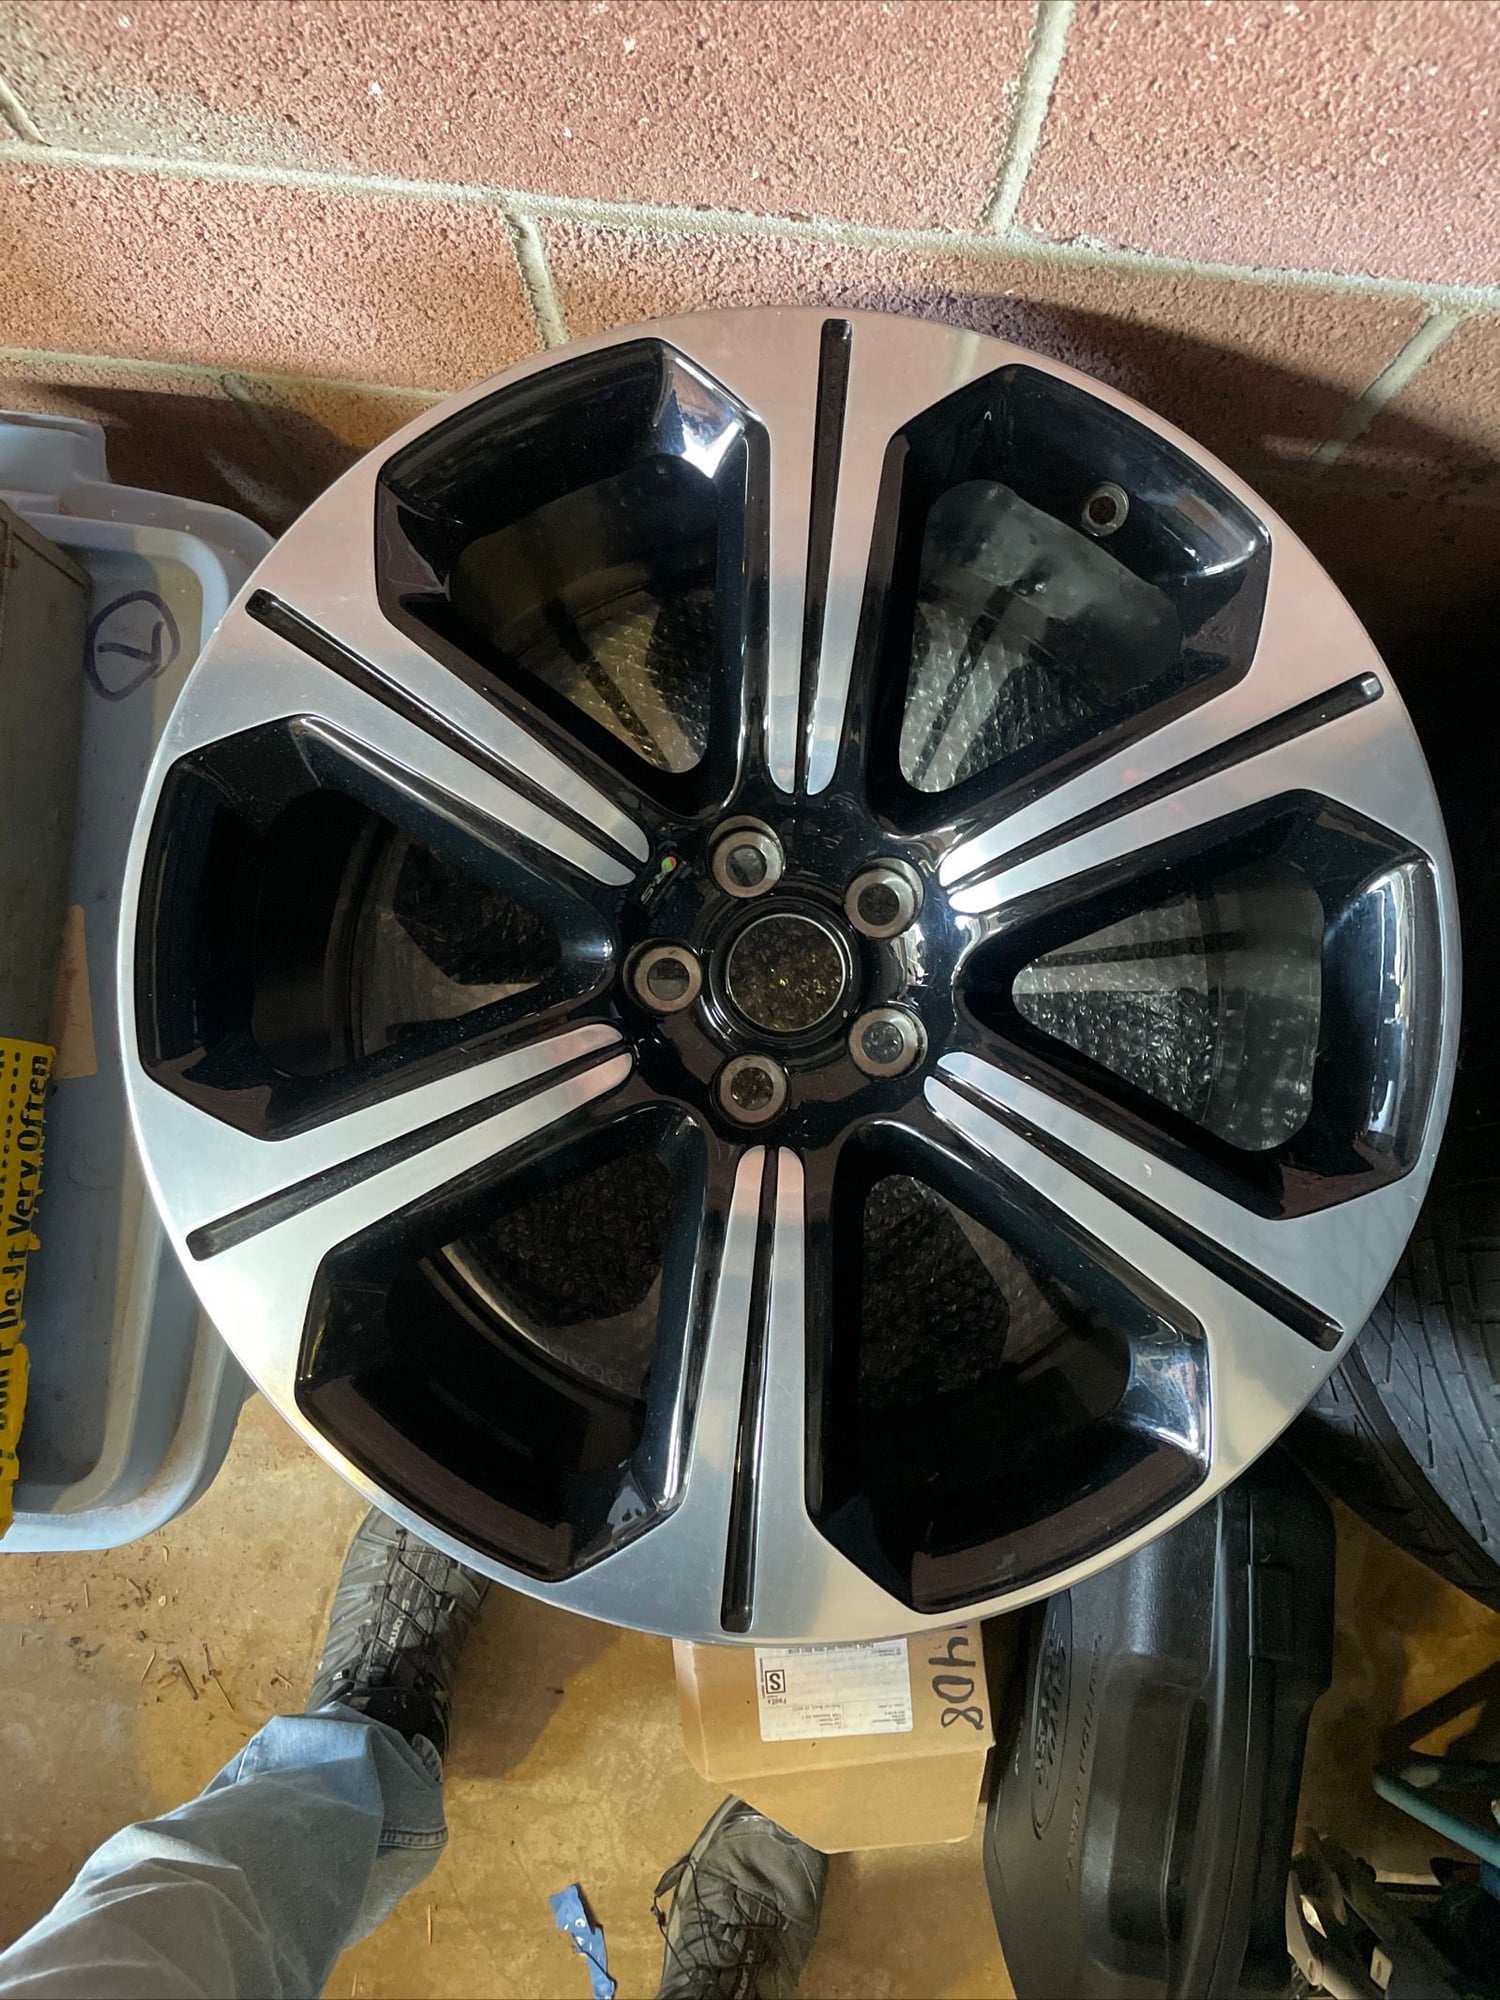 Wheels and Tires/Axles - XF RS Wheels - Quantity 2 - New - All Years  All Models - Redondo Beach, CA 90277, United States